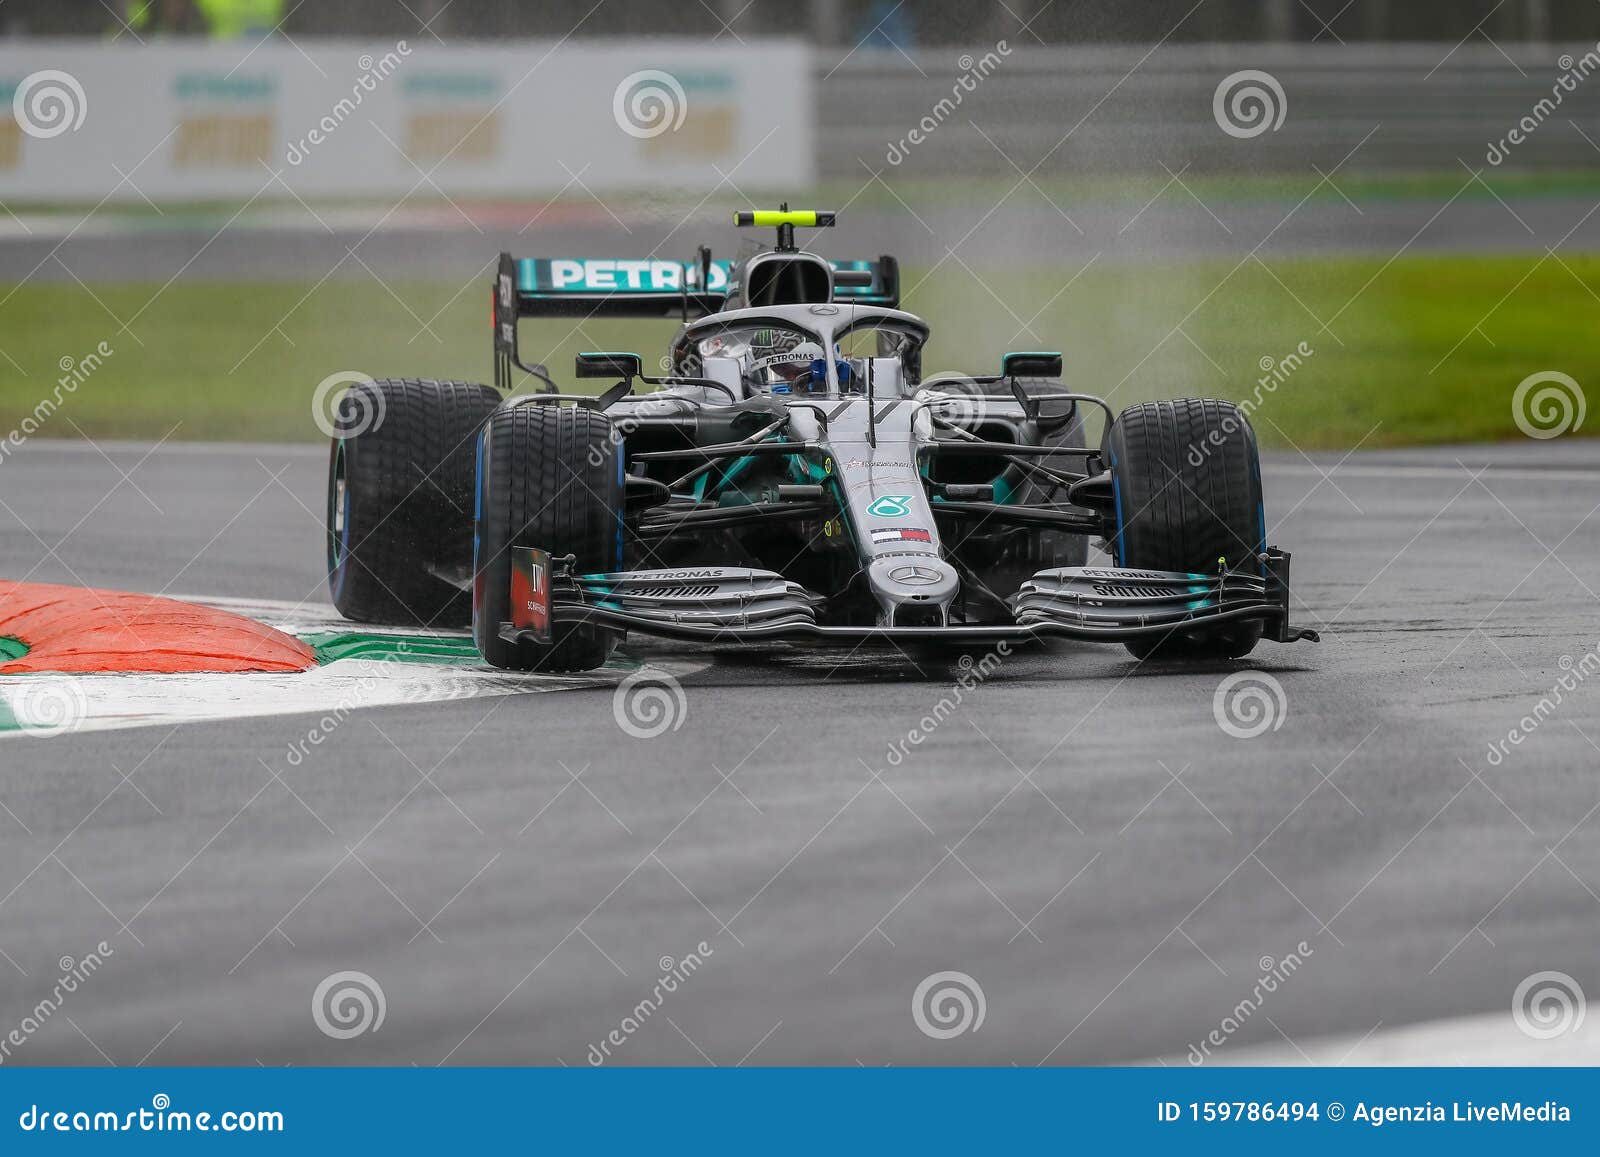 Formula 1 Championship Grand Prix Heineken of Italy 2019 - Friday - Free Practice 1 and 2 Editorial Stock Image